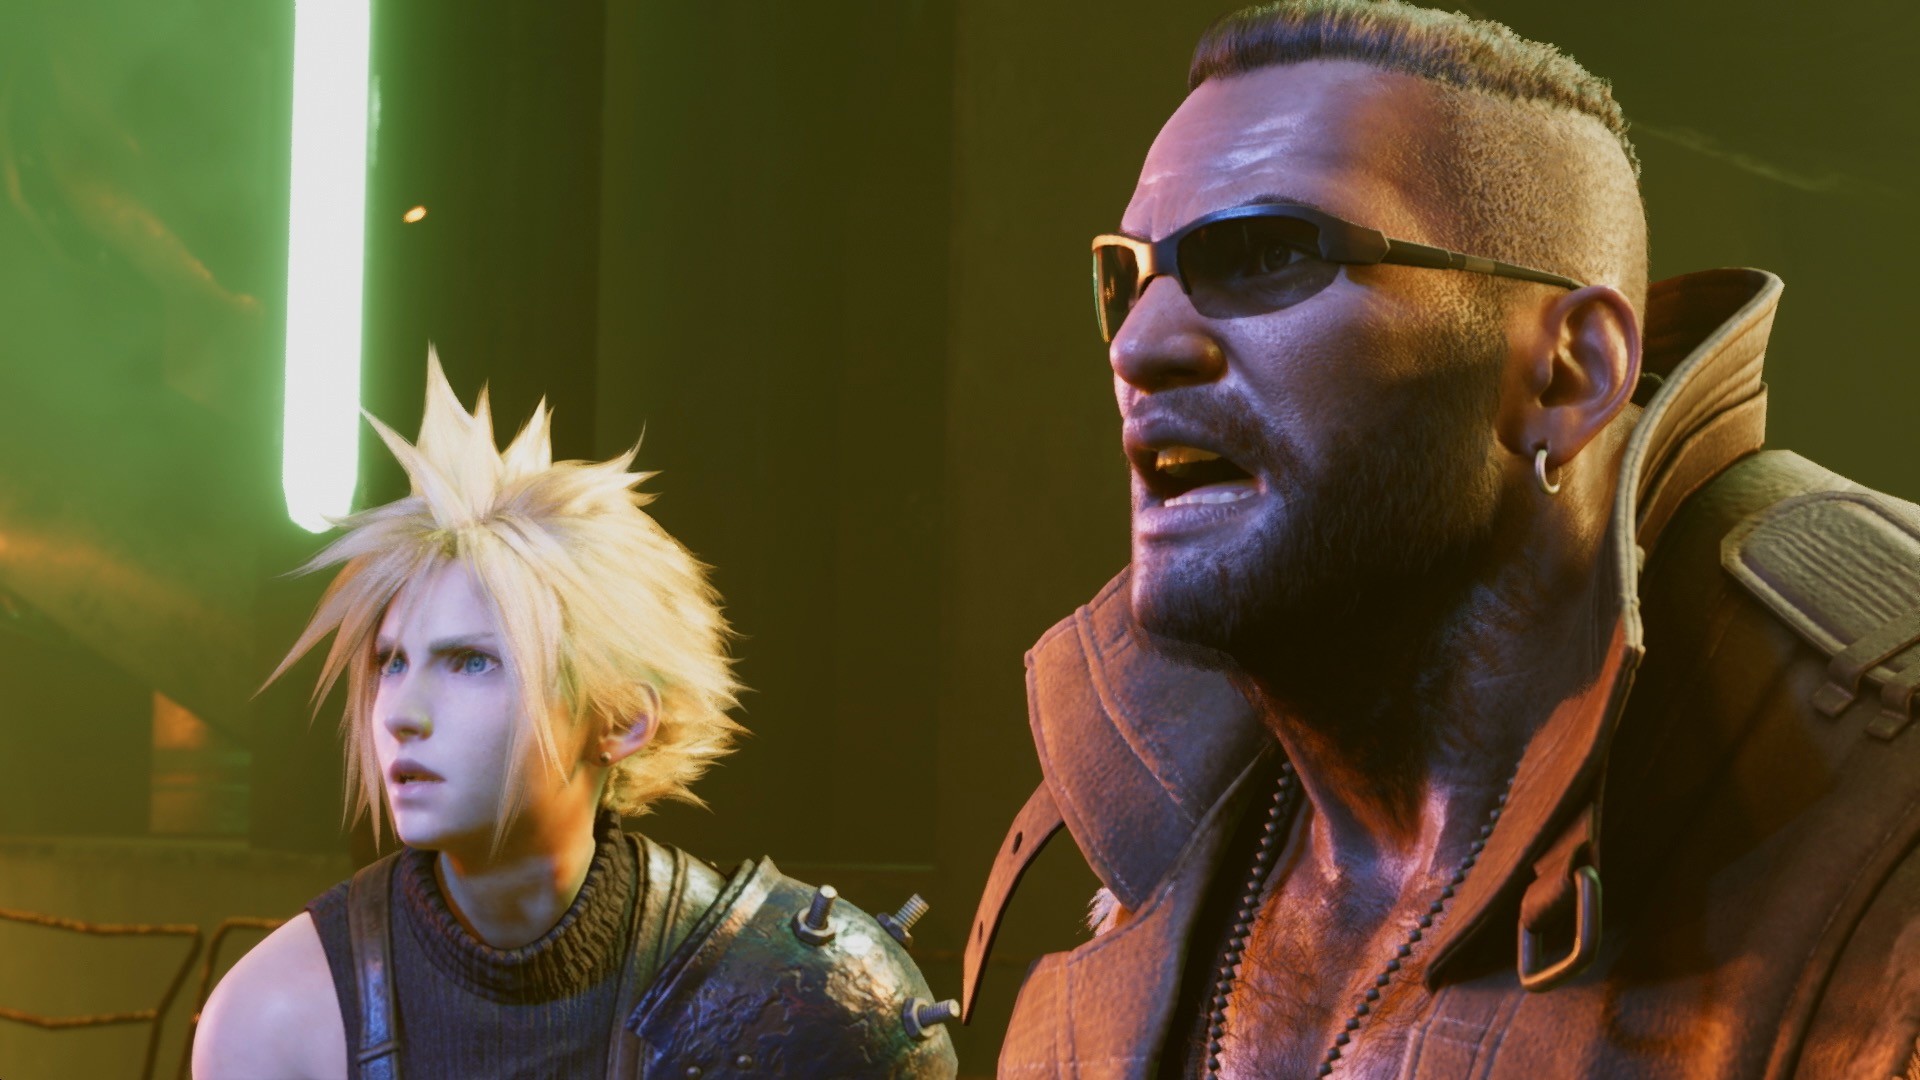 FF7, Final Fantasy 7 Remake, FF 7 Remake, Final Fantasy, Final Fantasy VII Remake, Square Enix, PS4, PlayStation 4, release date, gameplay, features, price, pre-order, Asia, 1st class edition, Collector’s Edition, Final Fantasy VII Remake [1st Class Edition], Final Fantasy VII Remake First Class Edition, English subtitles